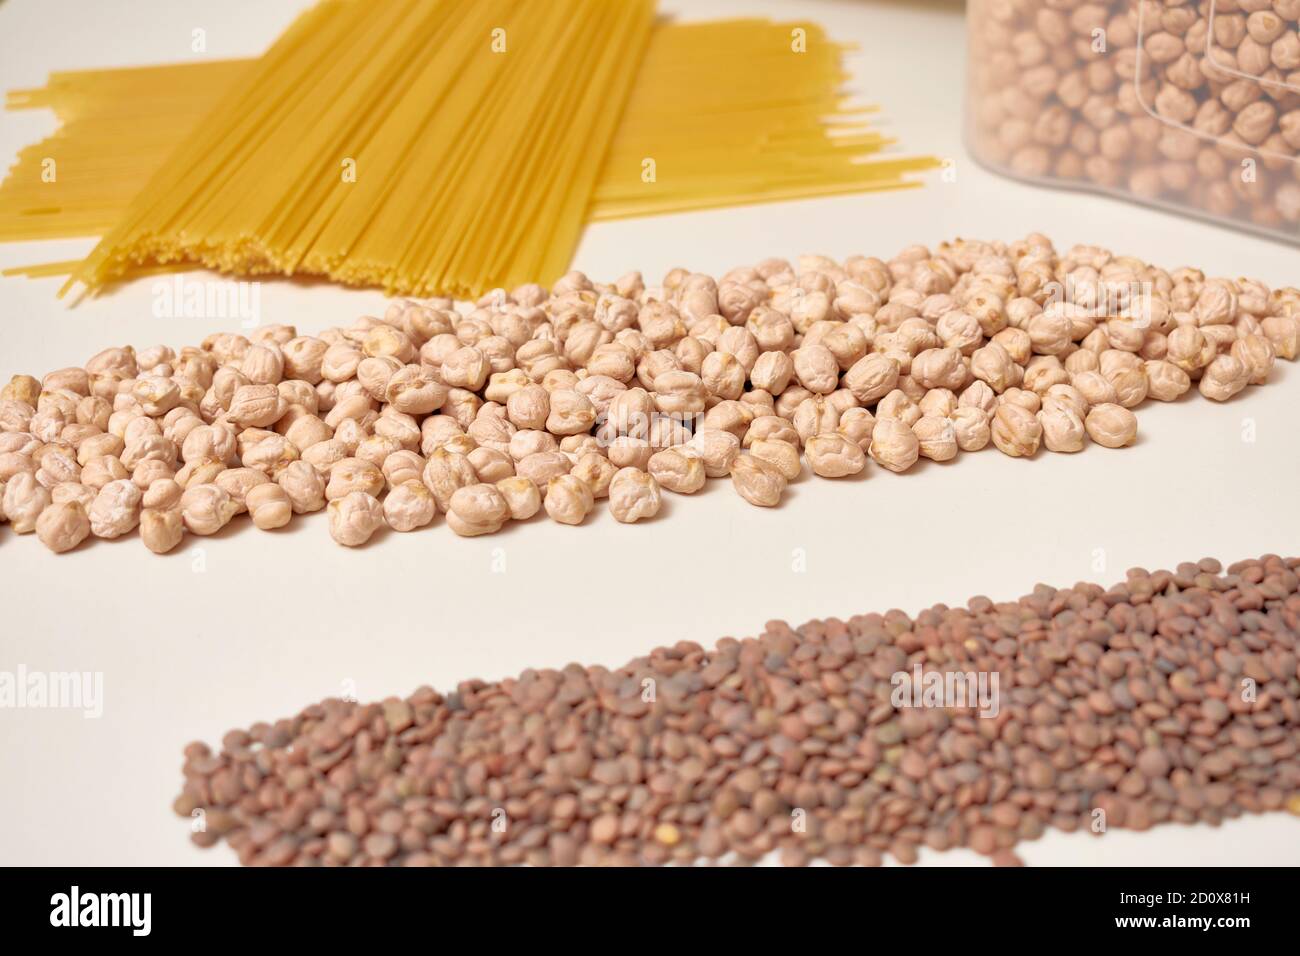 Rice, lentils, chickpeas and pasta. Basic carbohydrates in a balanced and healthy diet. Stock Photo